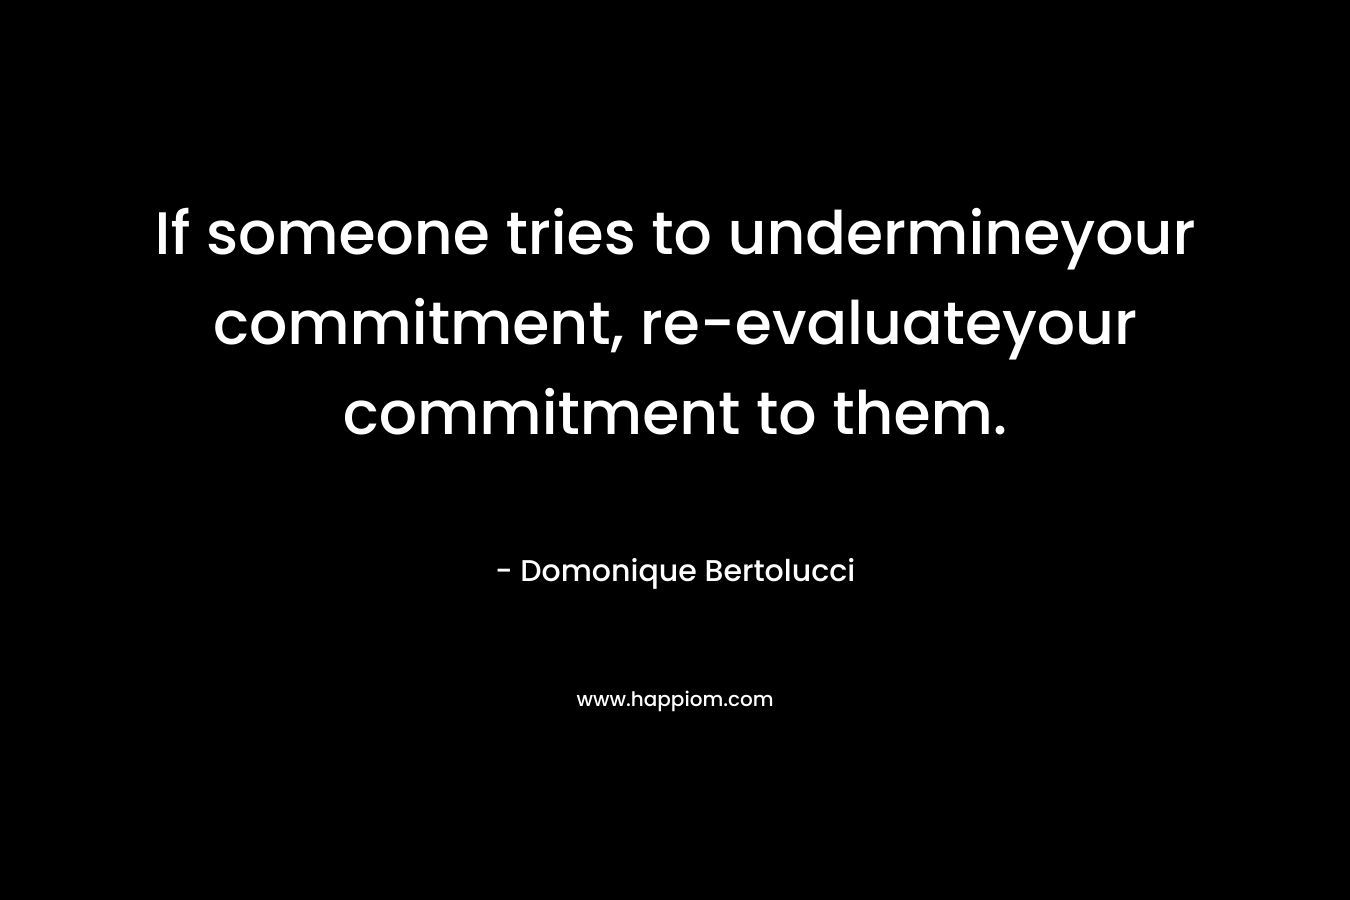 If someone tries to undermineyour commitment, re-evaluateyour commitment to them.